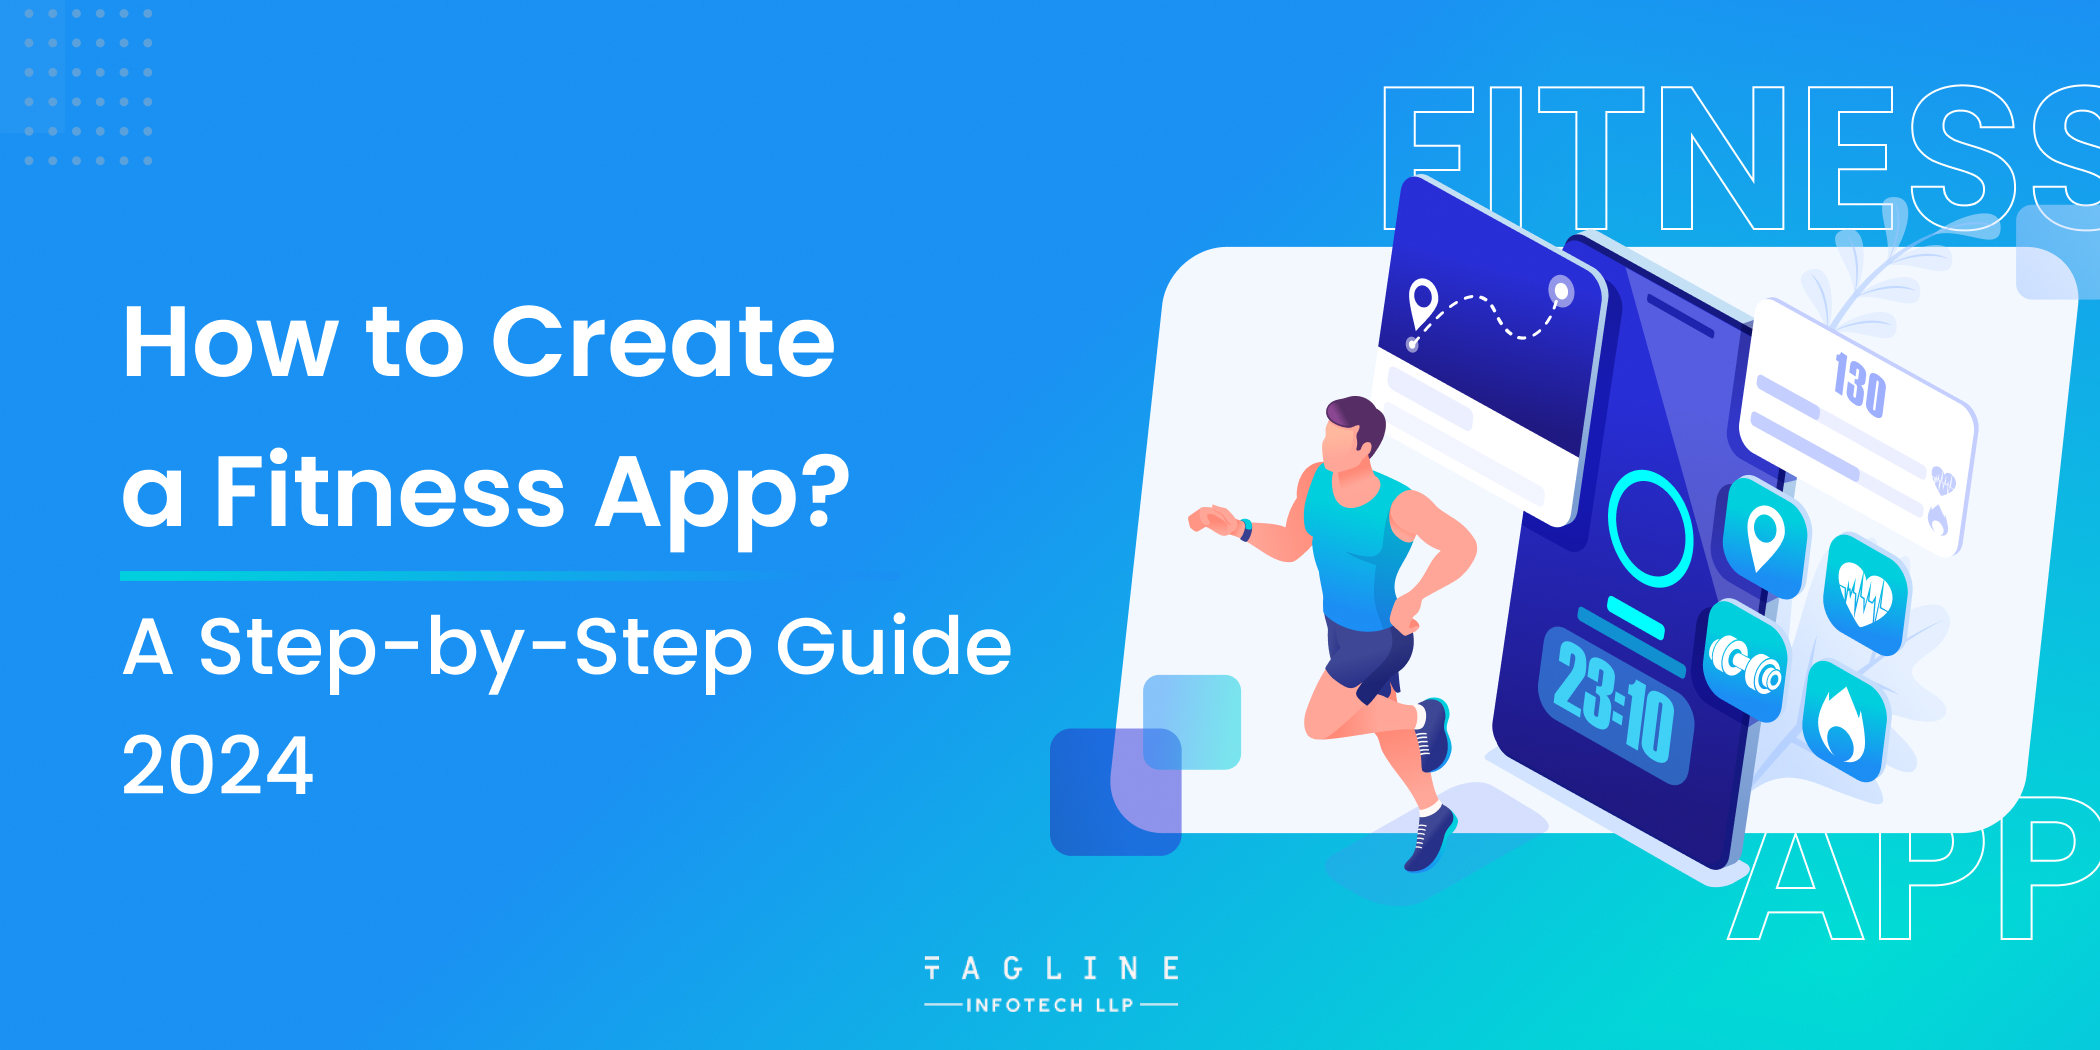 How to Create a Fitness App?: A Step-by-Step Guide (2024)